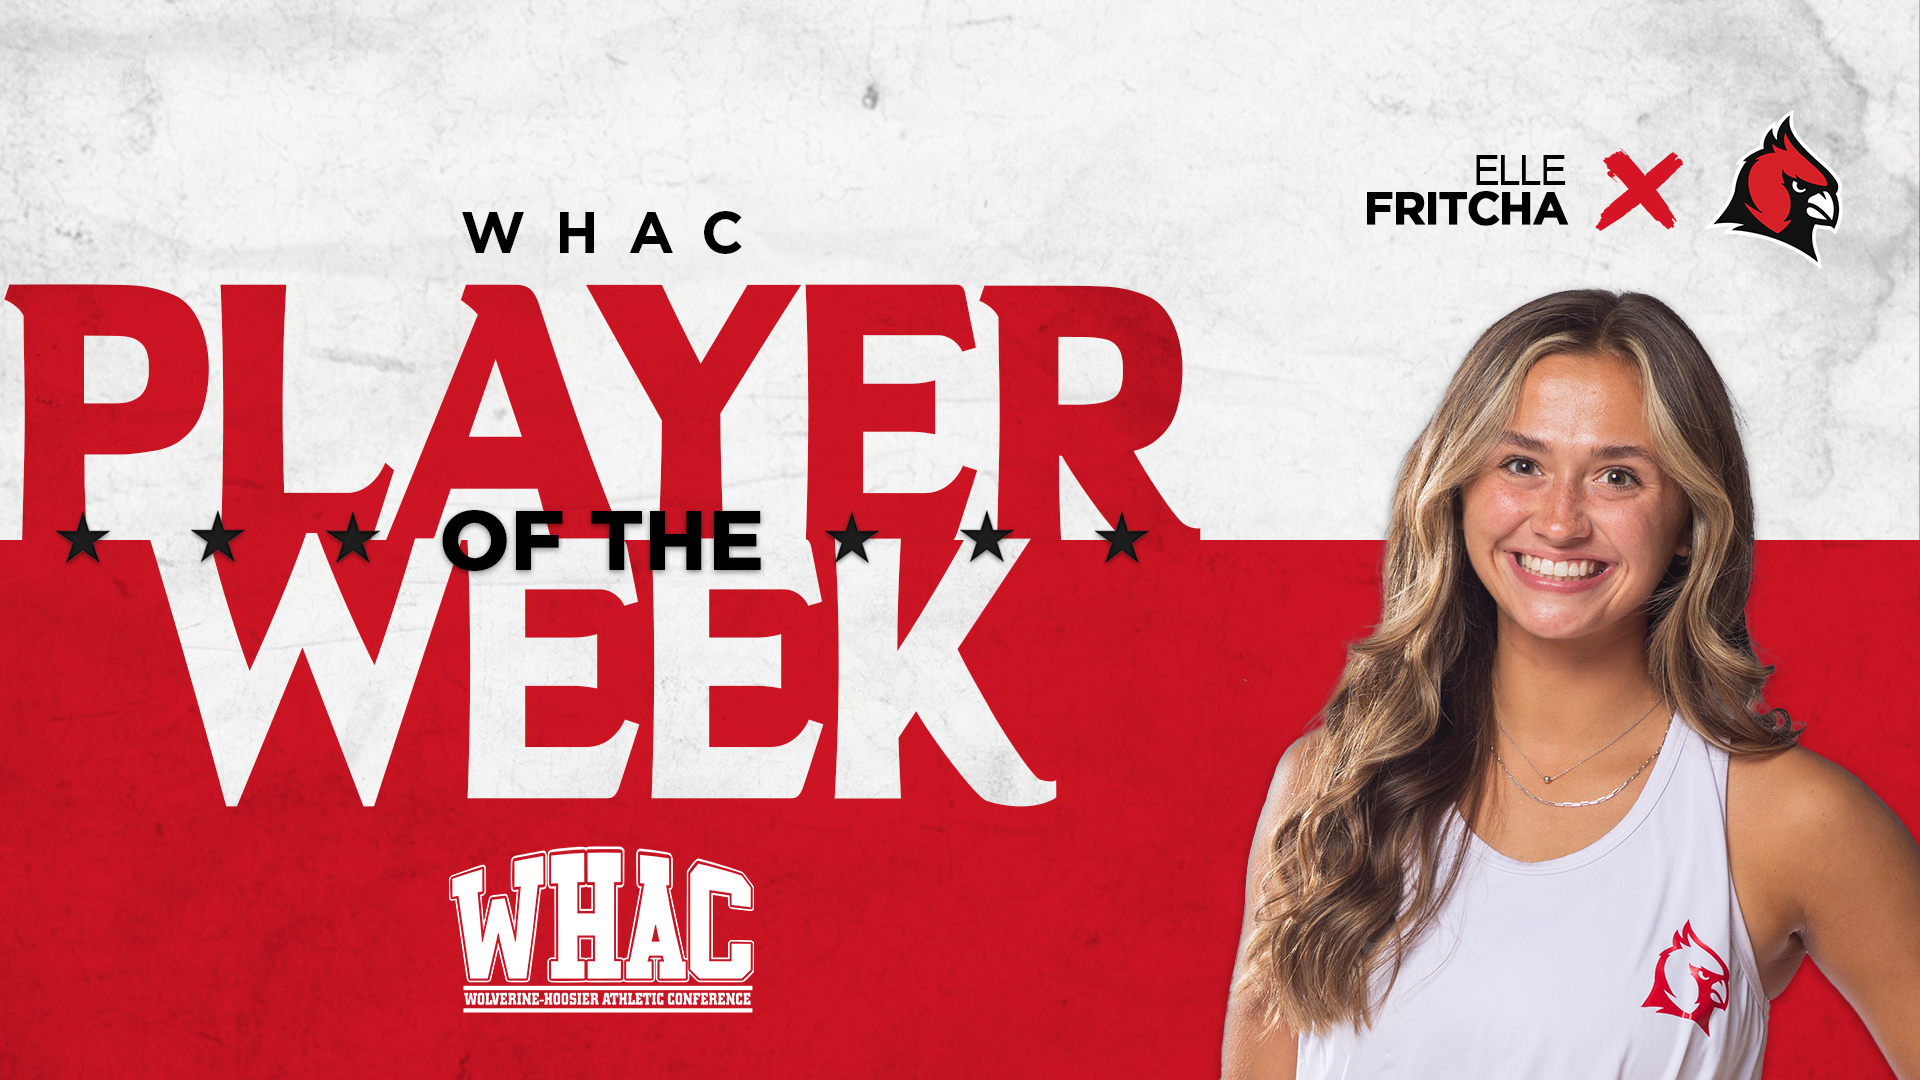 Fritcha picks up WHAC Player of the Week honors